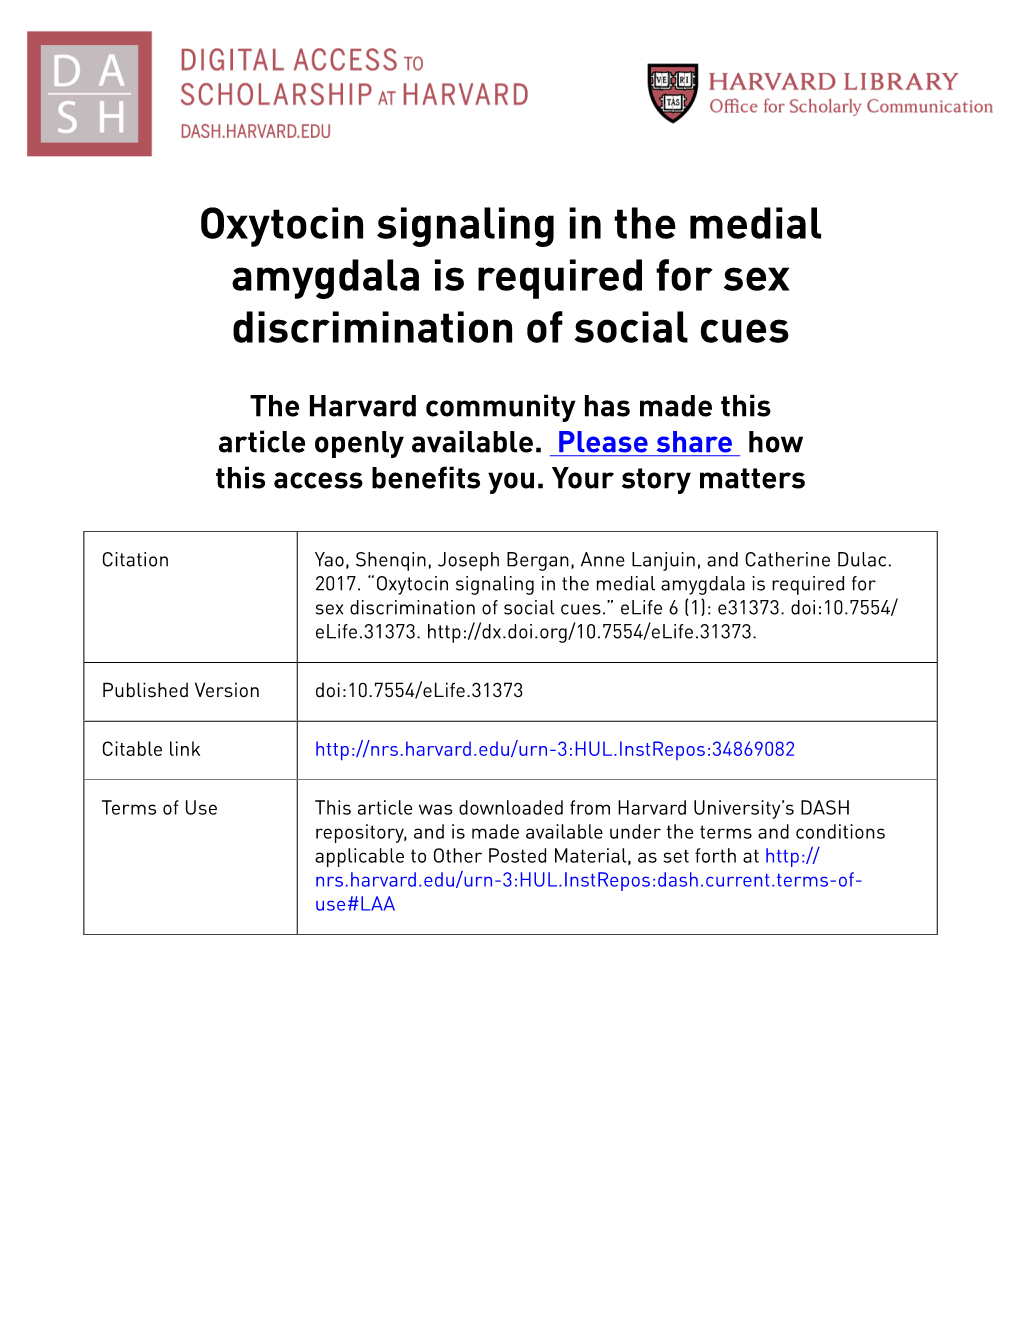 Oxytocin Signaling in the Medial Amygdala Is Required for Sex Discrimination of Social Cues